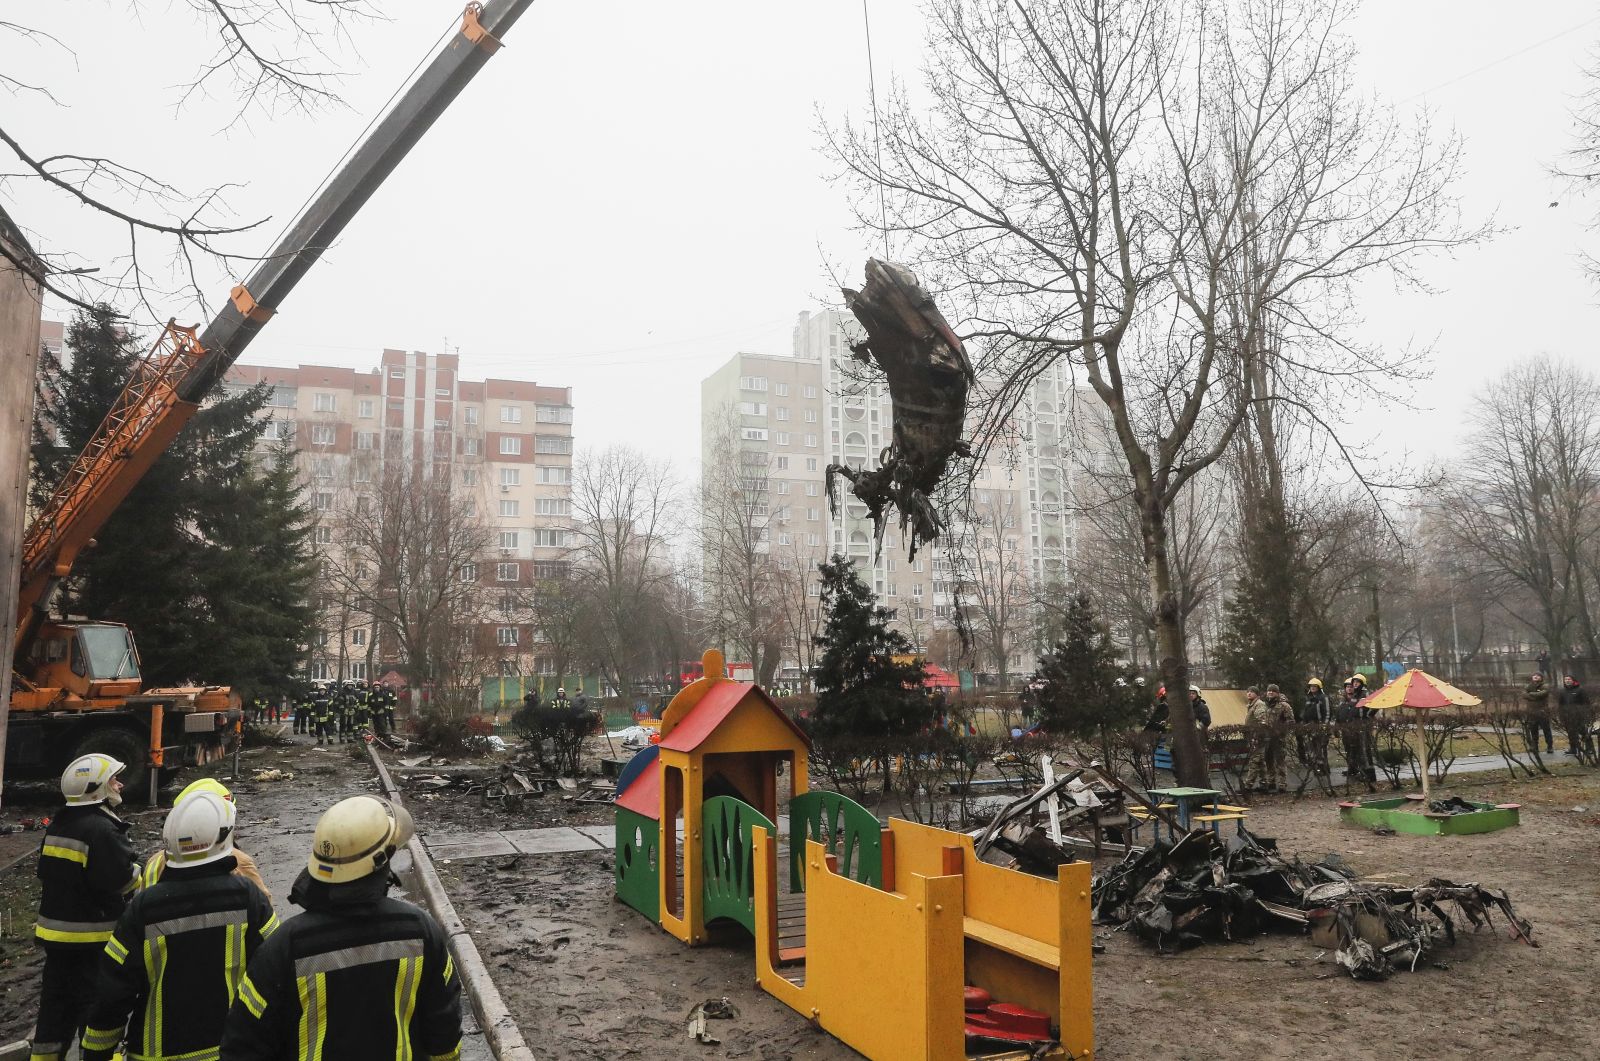 epa10413087 Rescue services remove debris of the helicopter at the scene of a helicopter crash in Brovary, near Kyiv, Ukraine, 18 January 2023. At least 18 people died, including three children, after a helicopter crashed near a kindergarten and a residential building in the city of Brovary, Oleksiy Kuleba, the head of Kyiv Regional Military Administration wrote on telegram. 'Among them are Minister of Internal Affairs of Ukraine Denys Monastyrskyi, his first deputy Yevhen Yenin, State Secretary of the Ministry of Internal Affairs Yuri Lubkovych, their assistants and the helicopter crew.', stated President of Ukraine Volodymyr Zelensky.  EPA/SERGEY DOLZHENKO